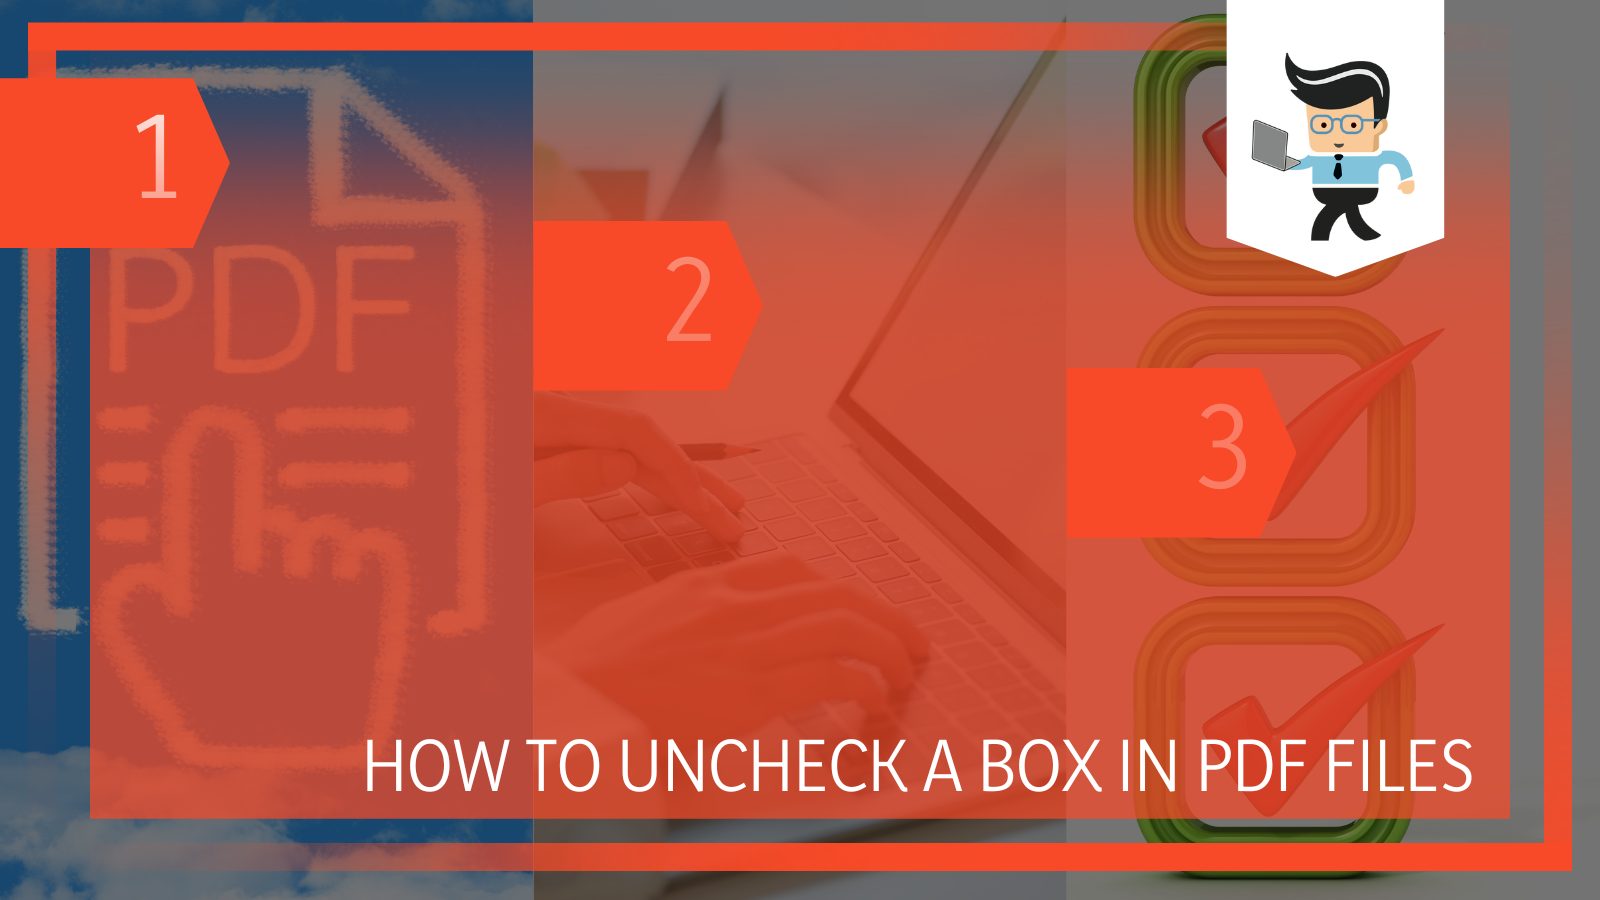 How to Uncheck a Box in PDF Files